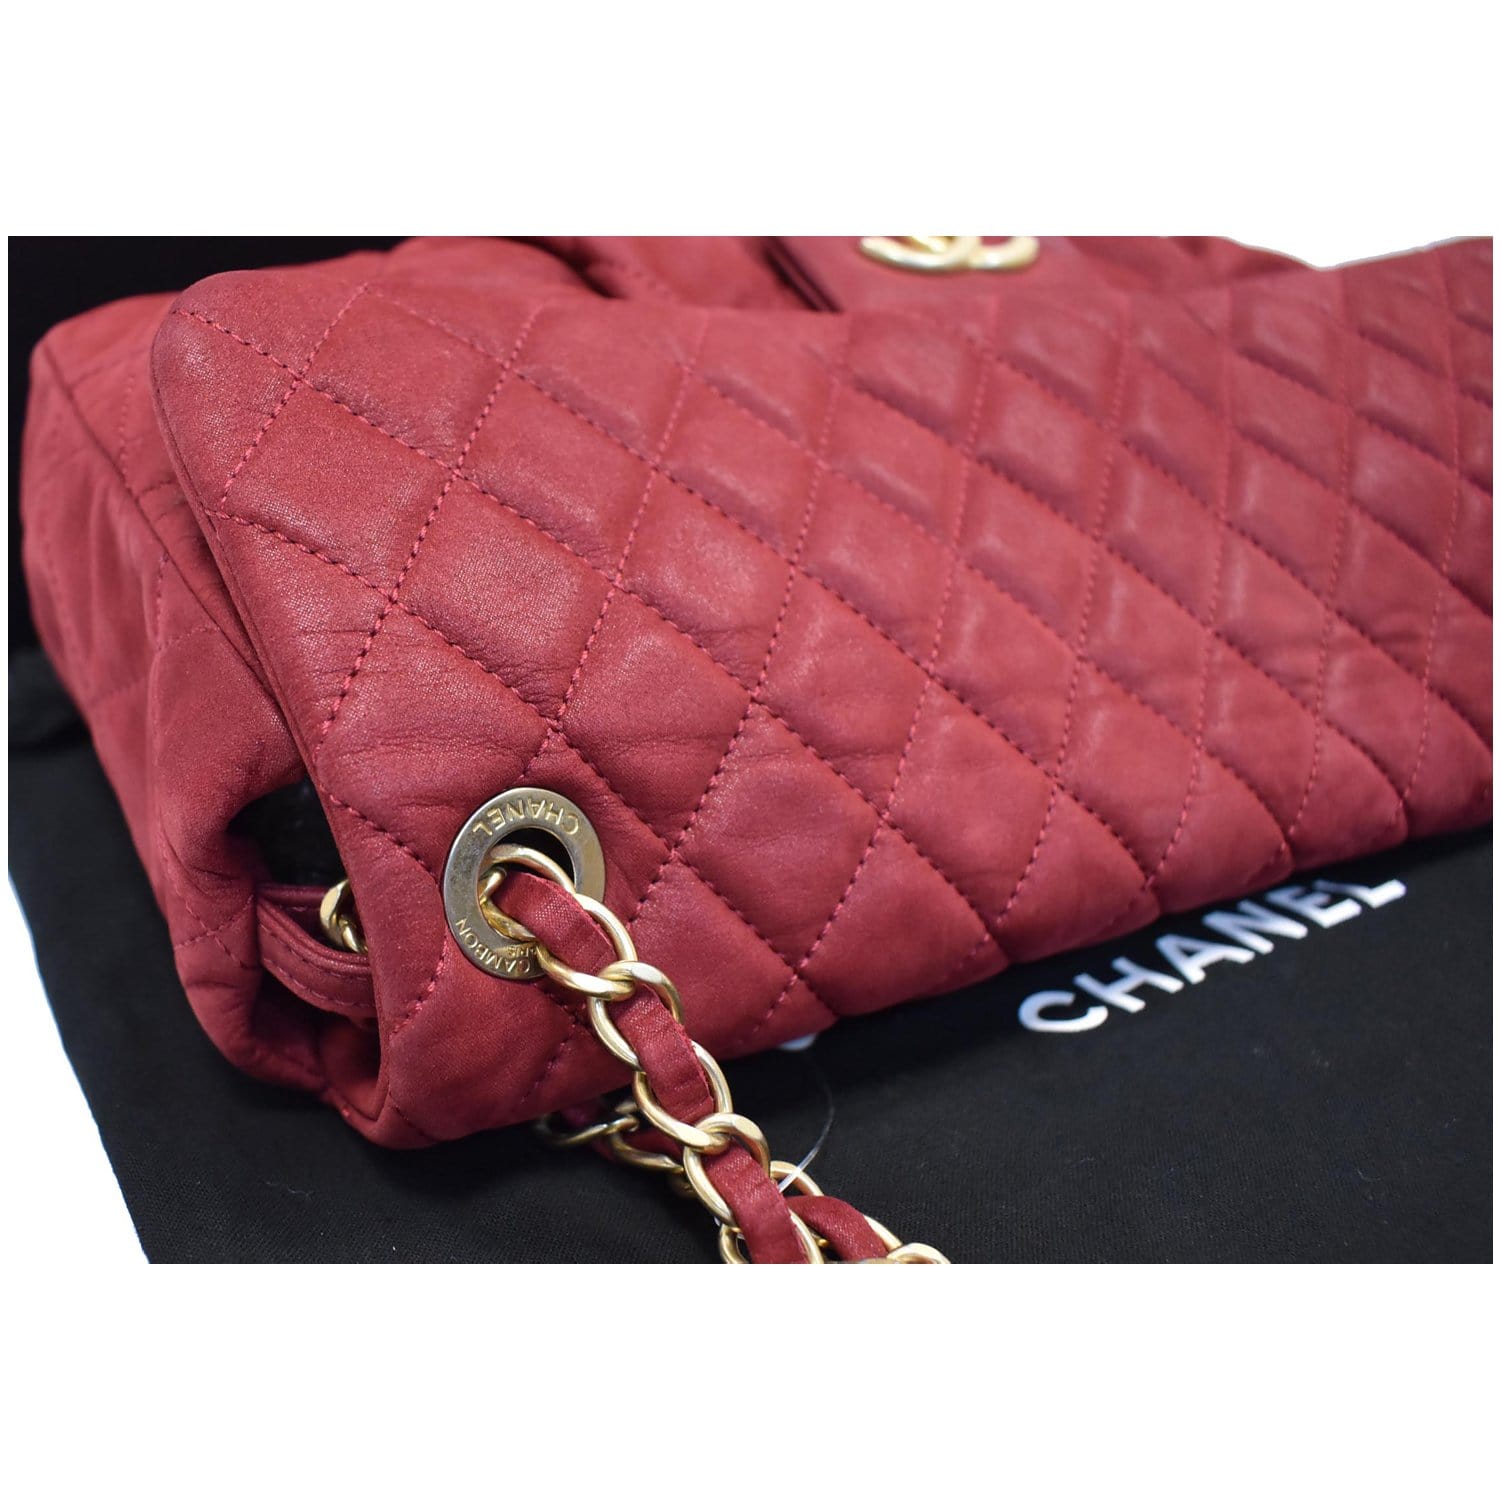 Chanel Limited Edition Timeless Bag In Pink Velvet Calf Leather